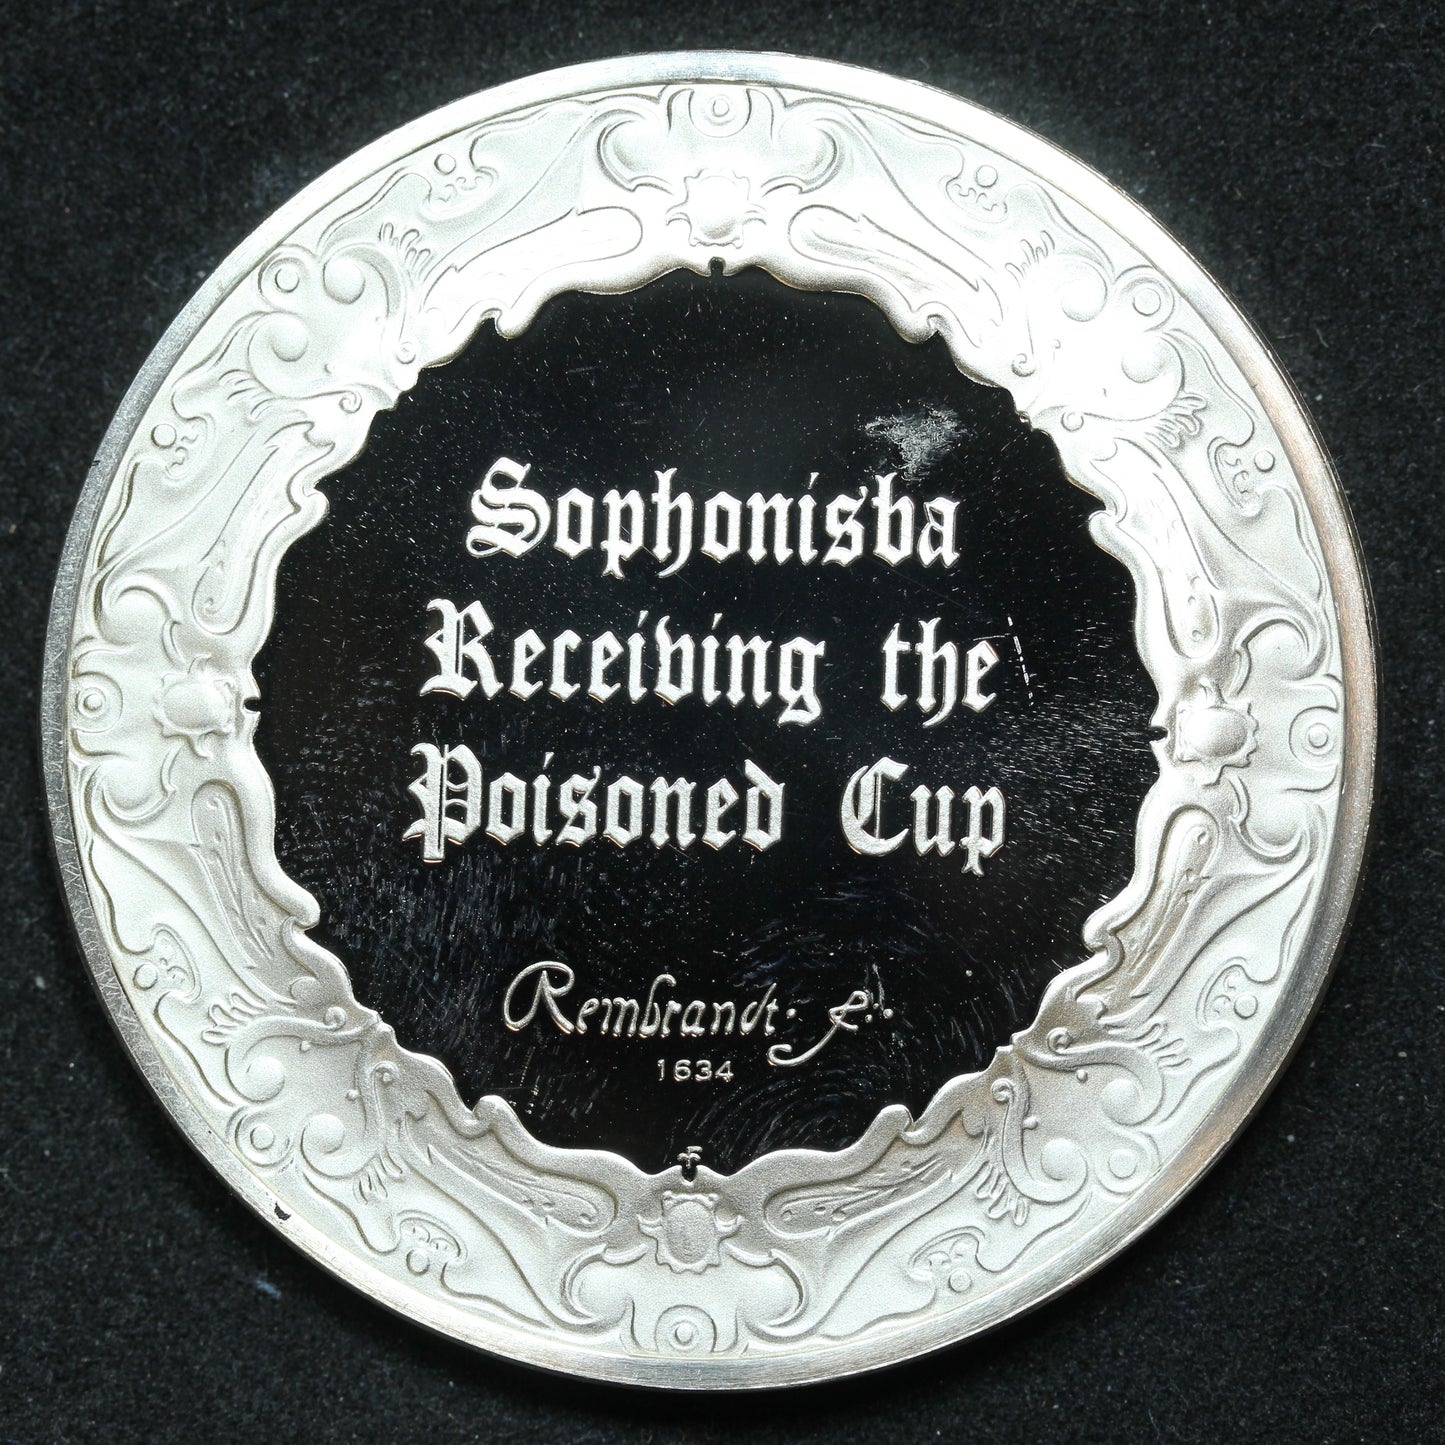 Sterling Silver Franklin Mint Genius of Rembrandt Sophonisba Receiving Poisoned Cup